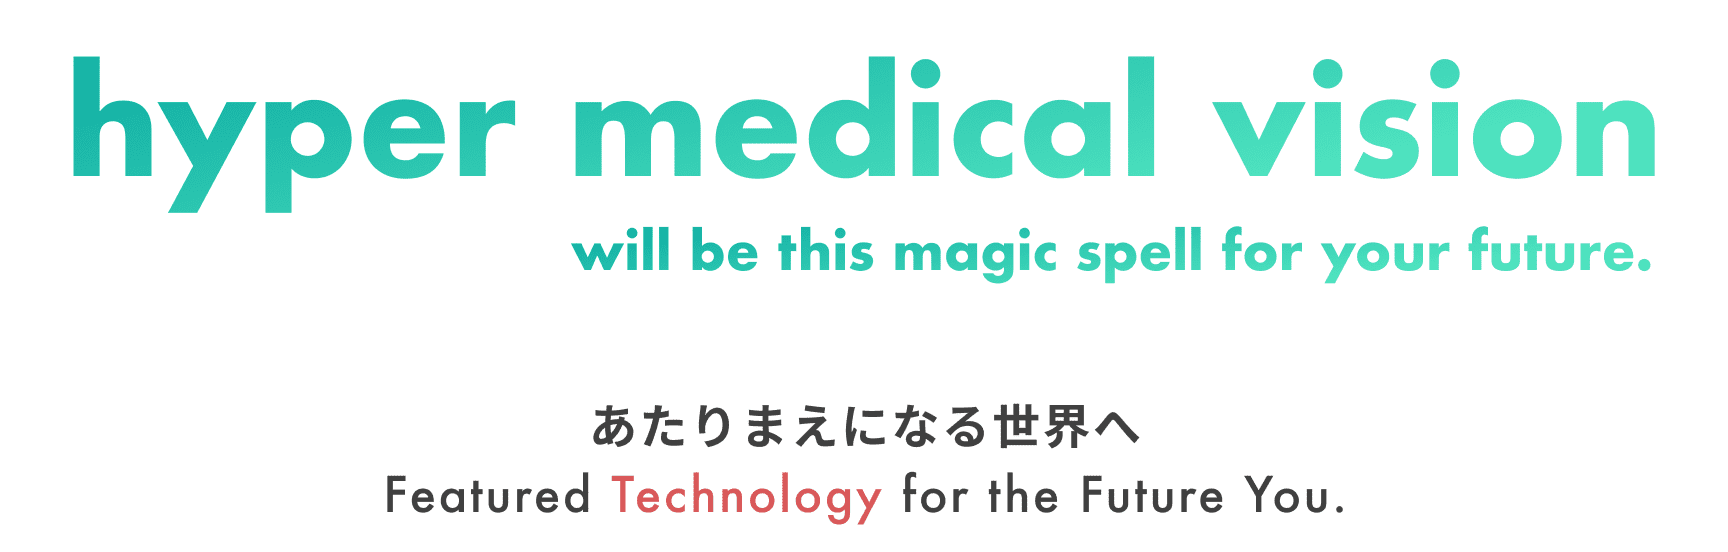 hyper medical vision will be this magic spell for your future. あたりまえになる世界へ Featured Technology for the Future You.